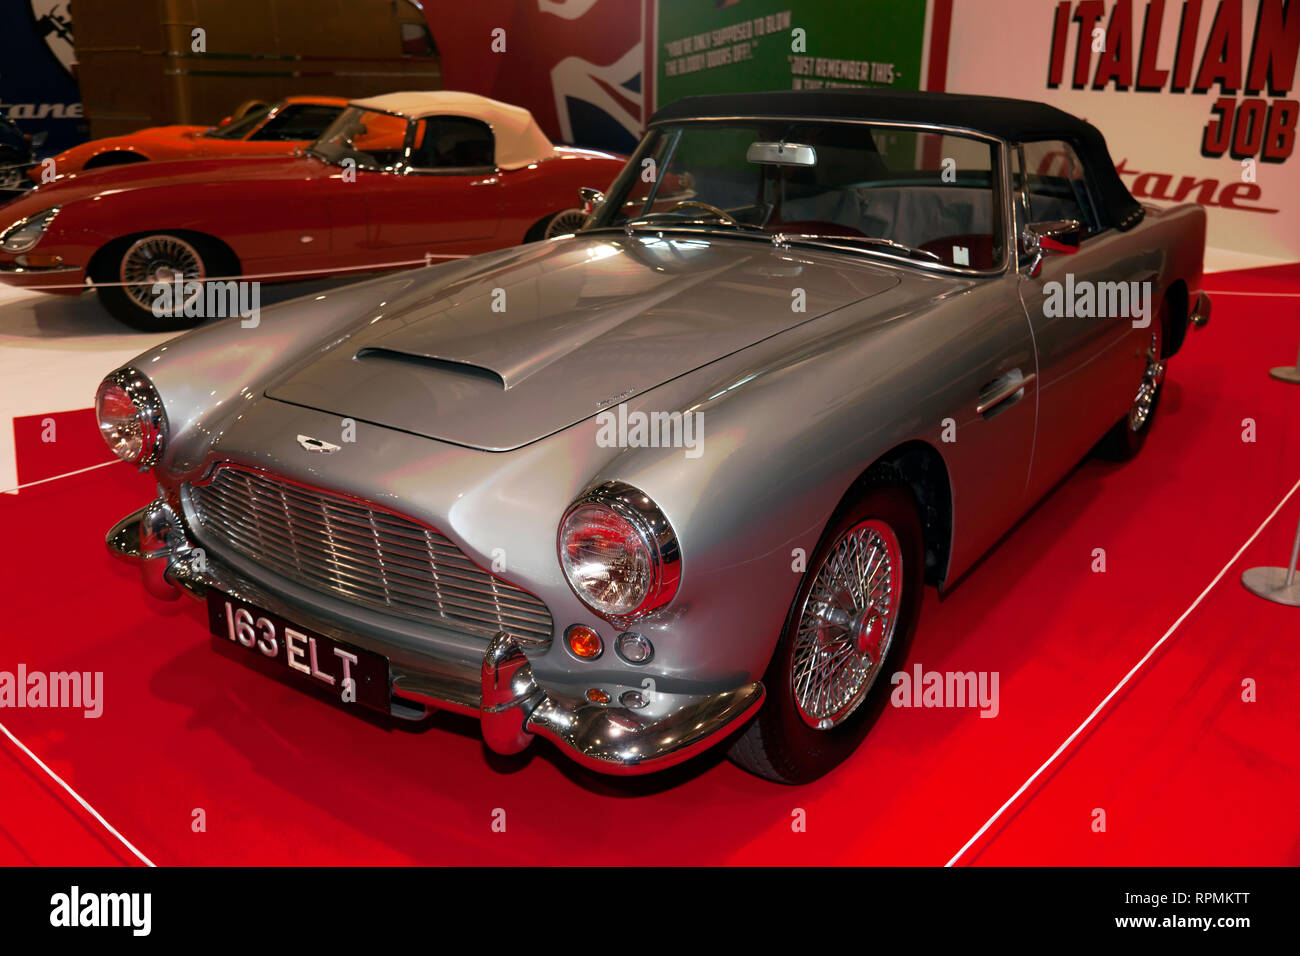 The 1962 Aston Martin DB4 used by Sir Michael Cain, as Charlie Croker, in the Italian Job,  a special  exhibition honoring this ionic British Film, Stock Photo